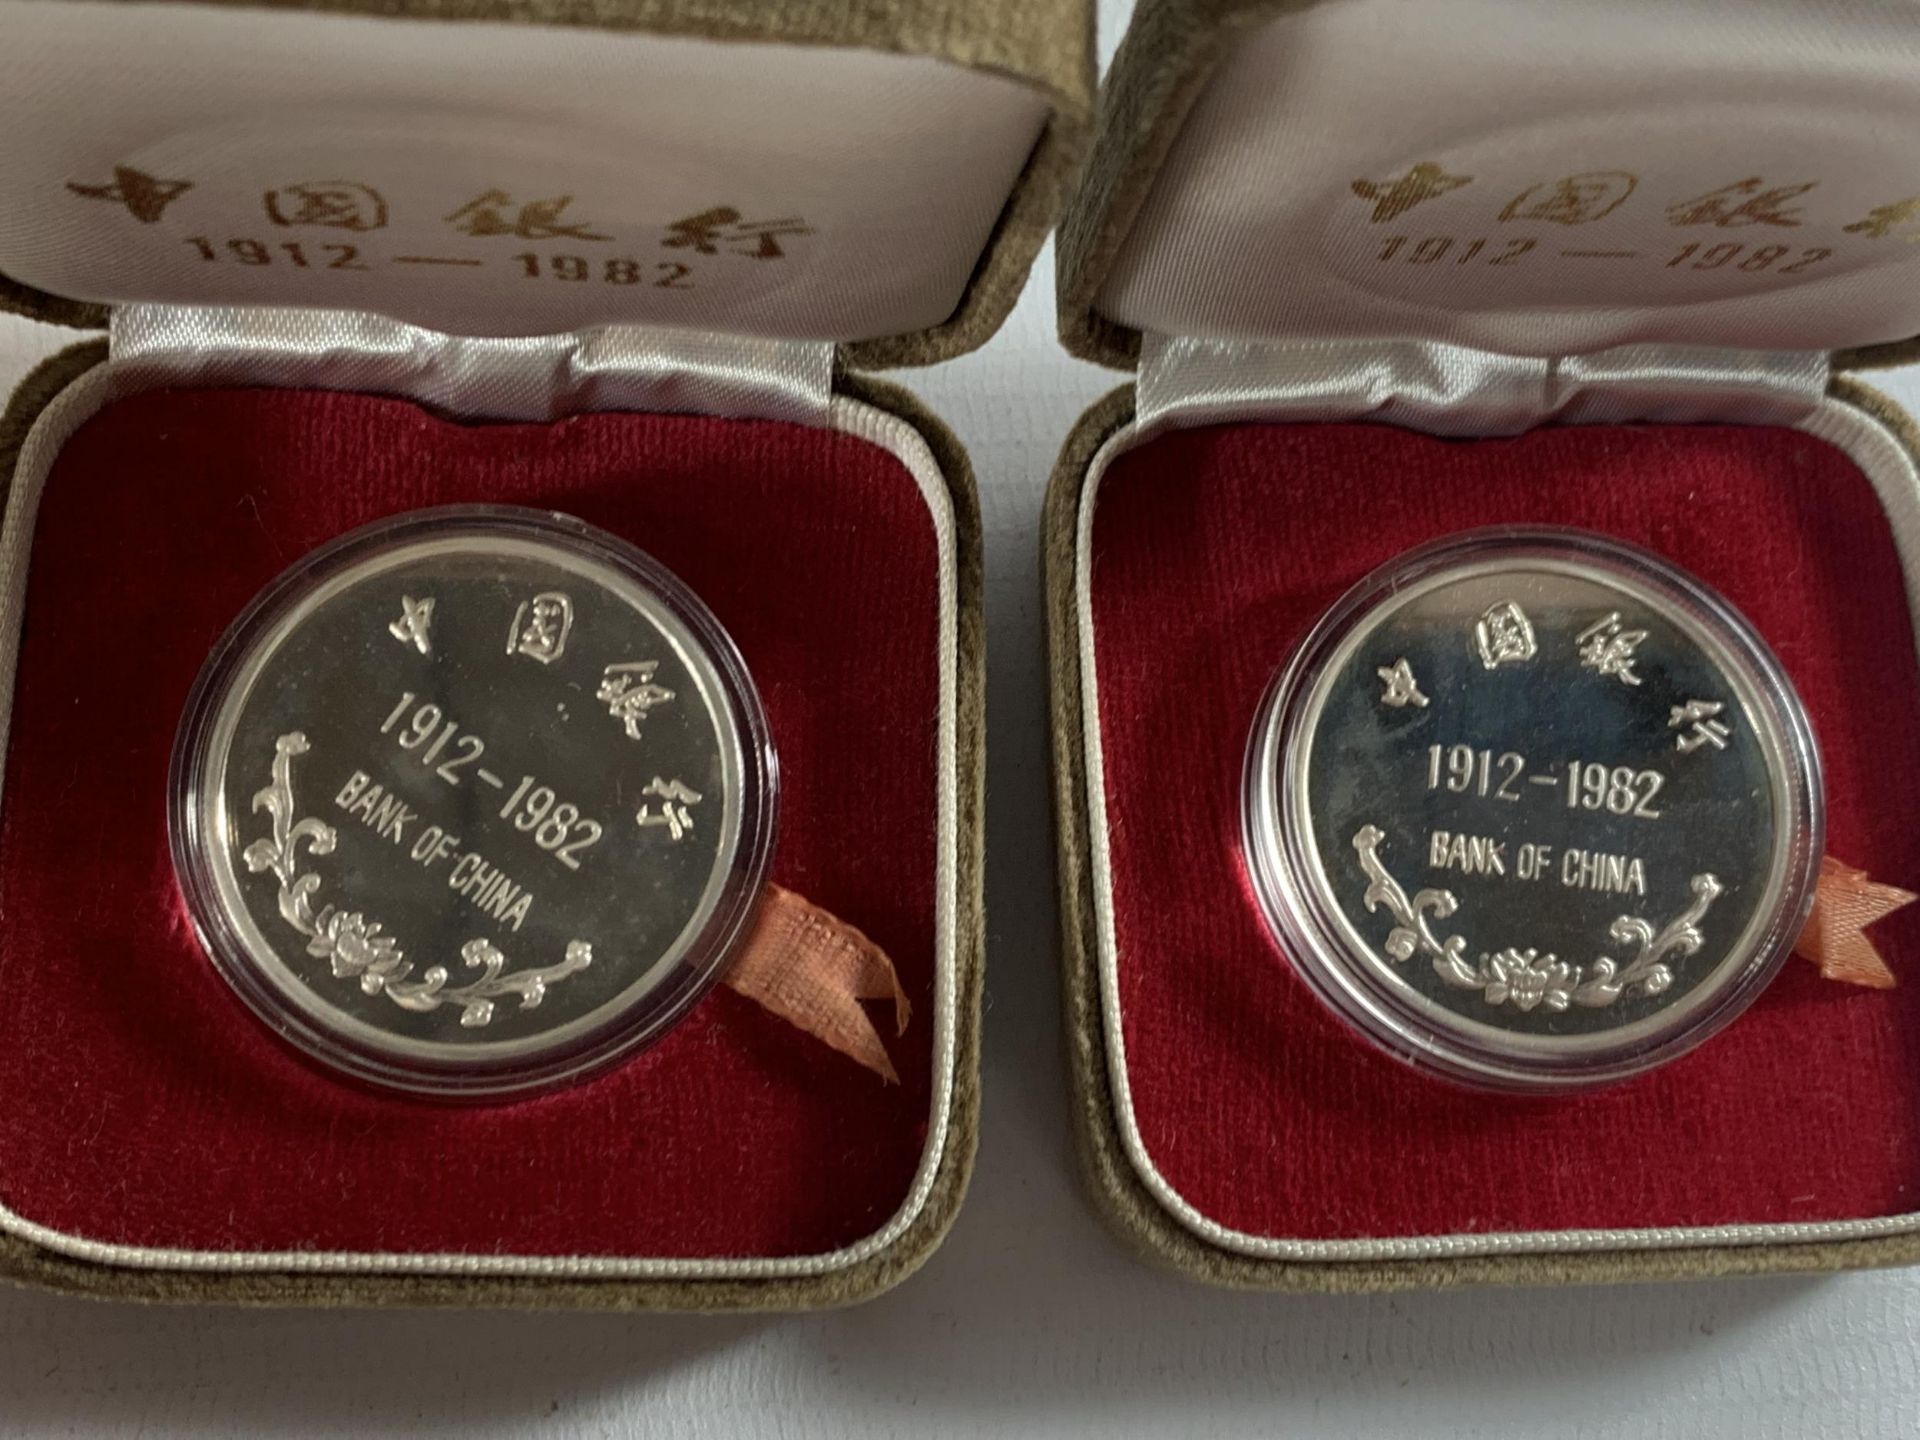 * A COLLECTION OF CASED MEDALS RELATING TO SPORT, BANKING AND RUSSIA - Image 4 of 6